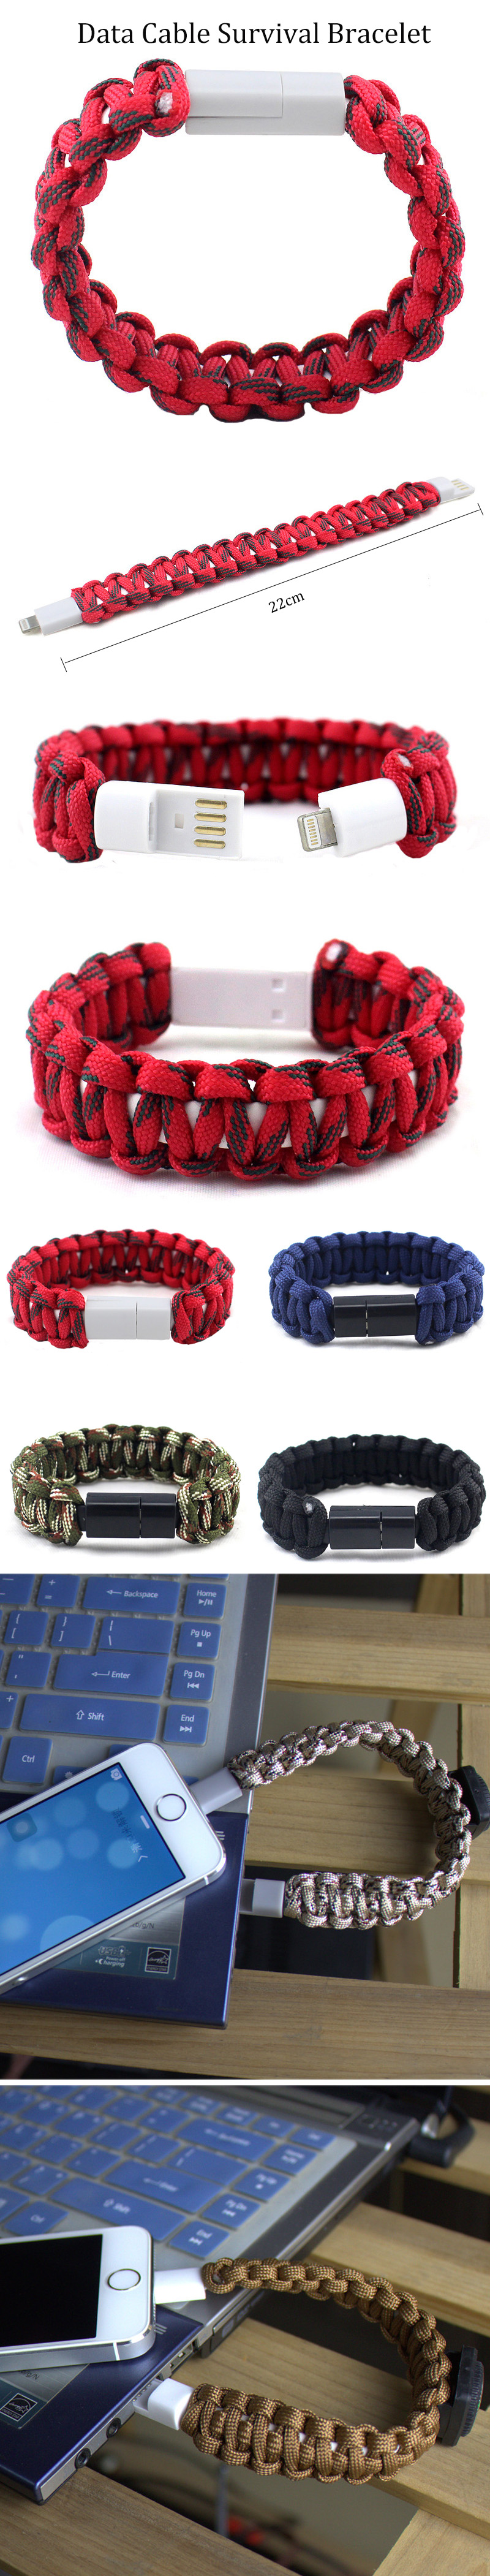 EDC-Outdoor-Survival-Bracelet-Camping-Emergency-Paracord-Tool-Kits-USB-Data-Cable-For-iPhone-1356940-1